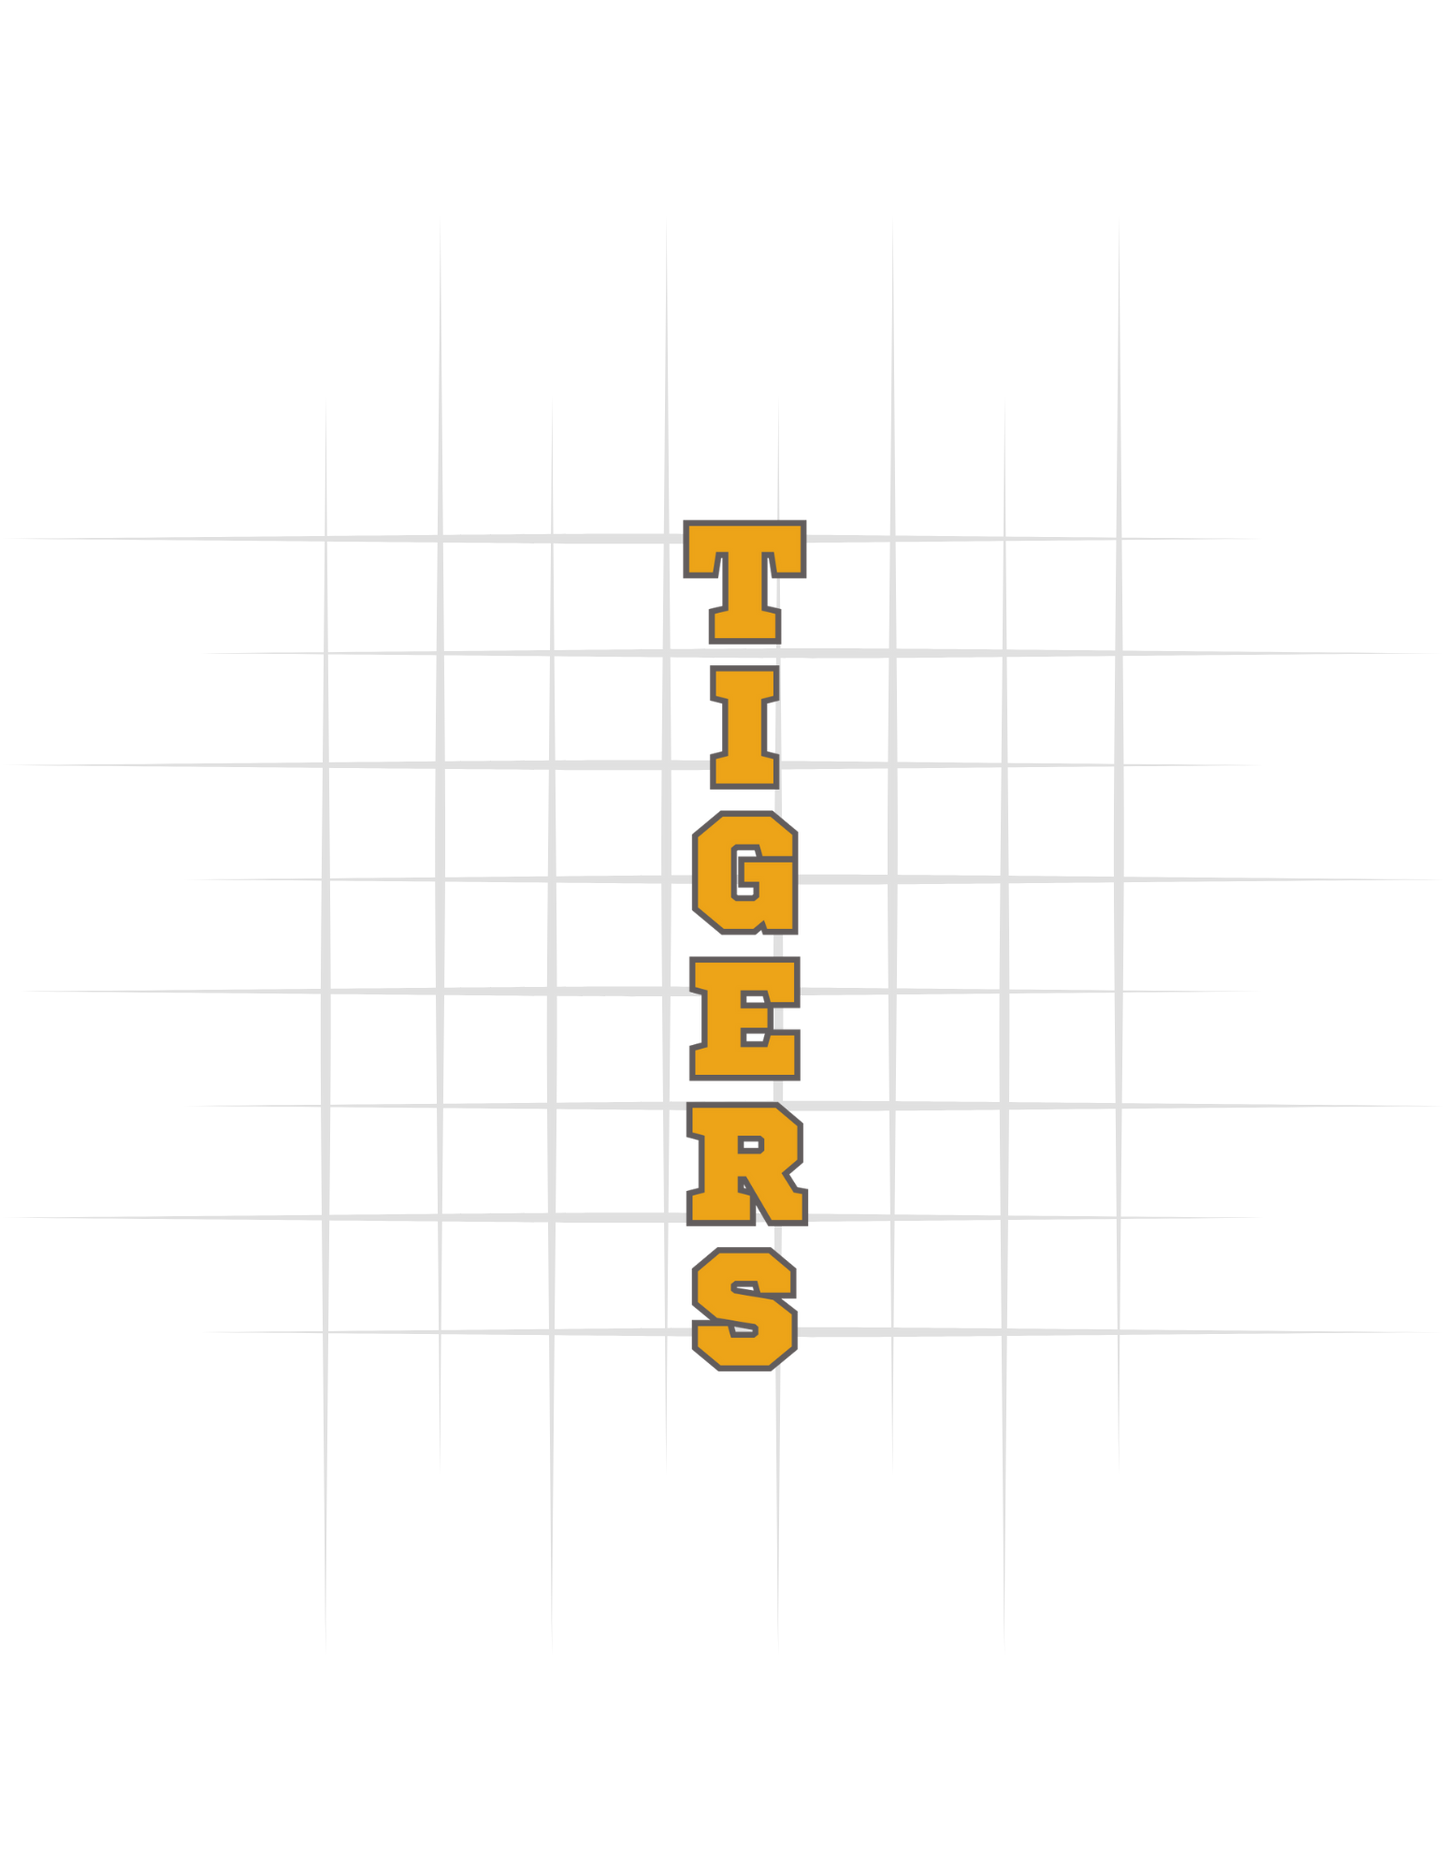 Tigers This Is Our House Tee